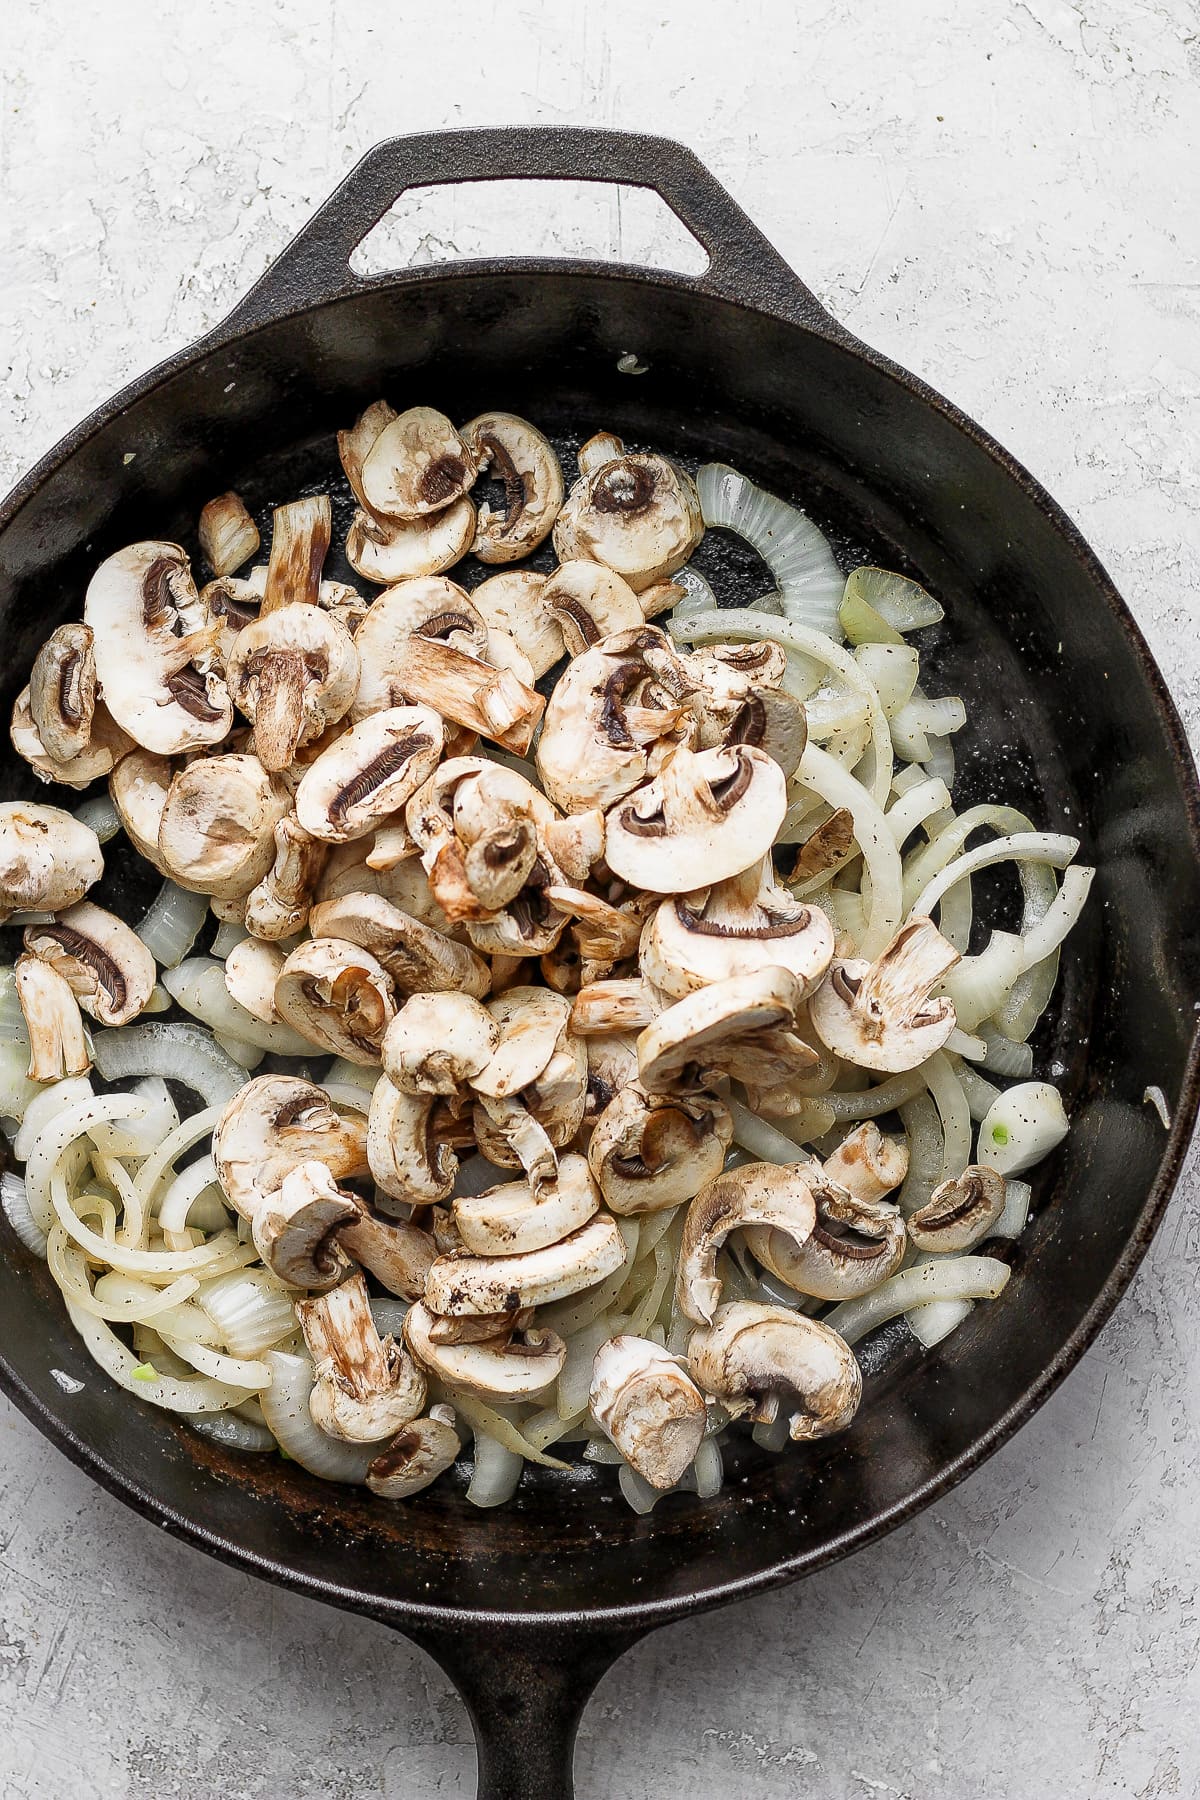 Cast iron pan with slightly cooked onions and sliced mushrooms.